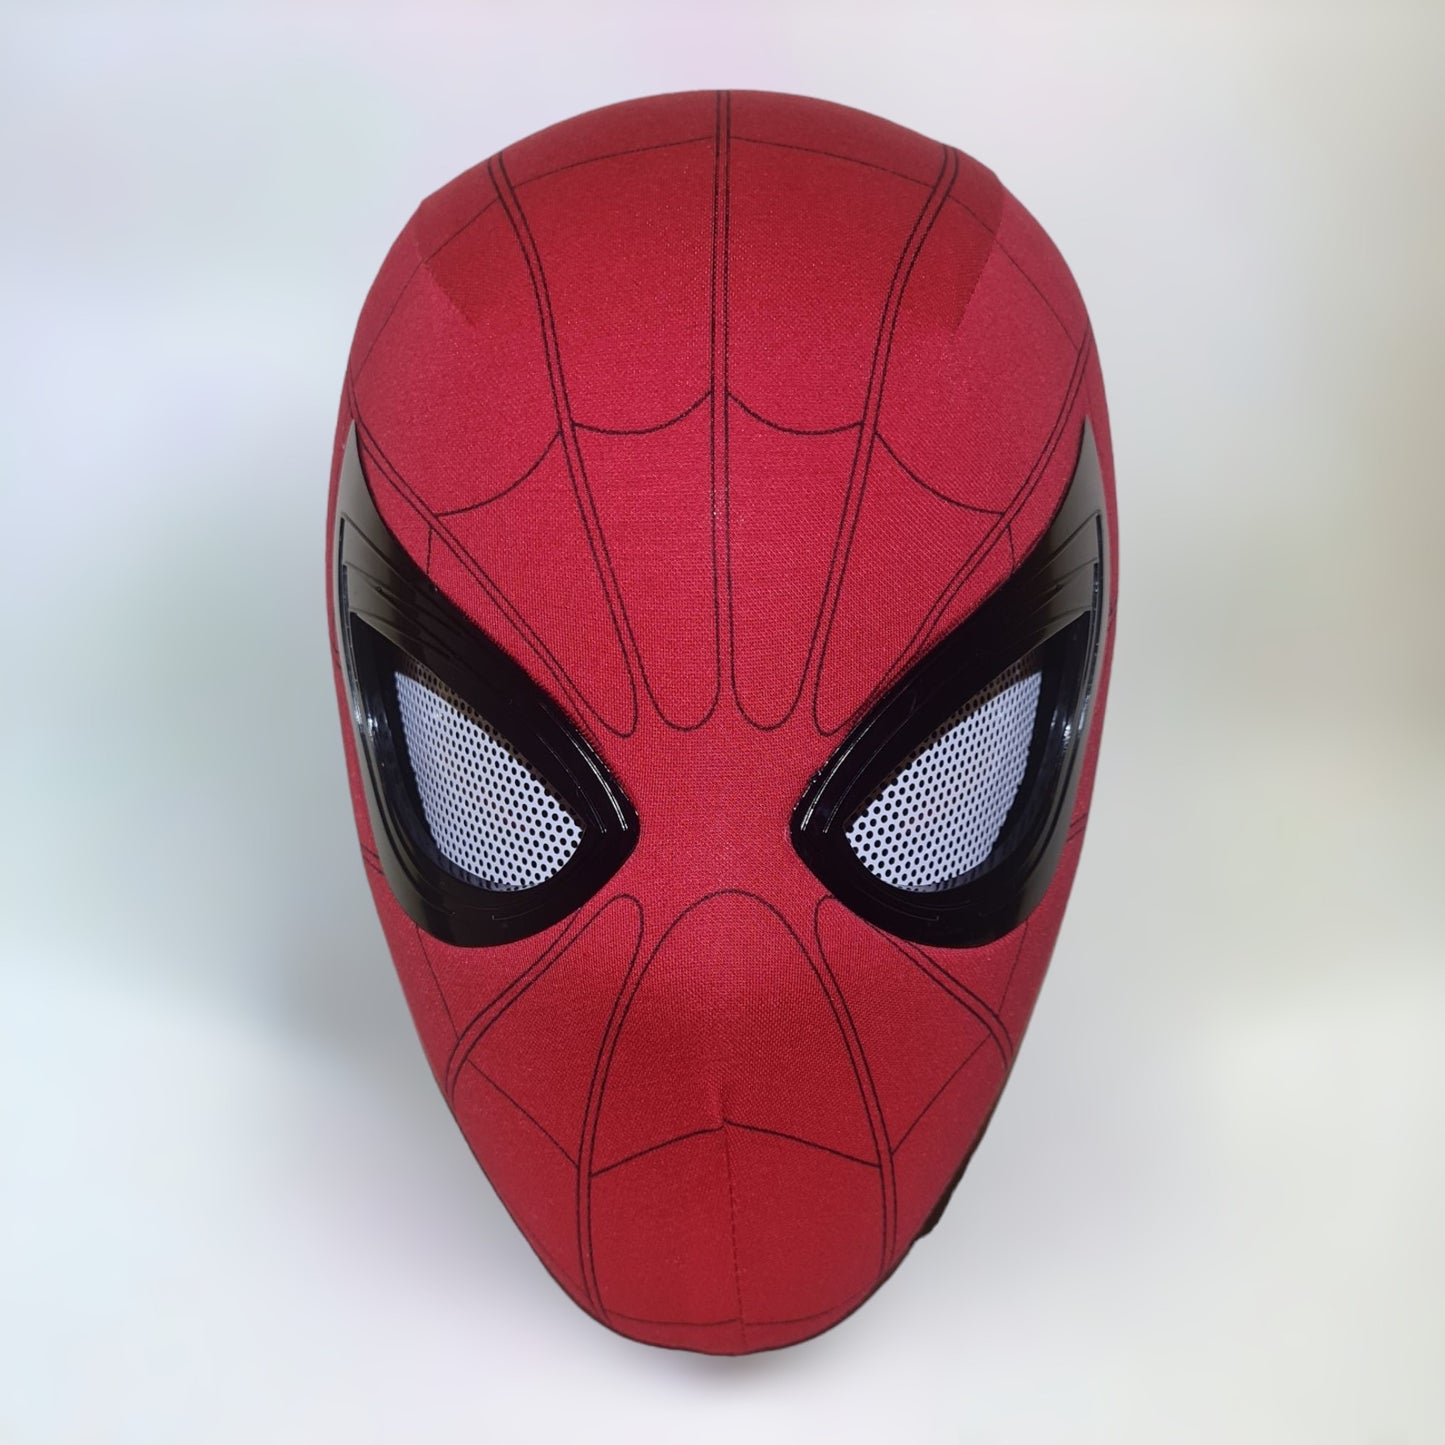 Spiderman mask with blinking movable eyes chin control on a plain white background.